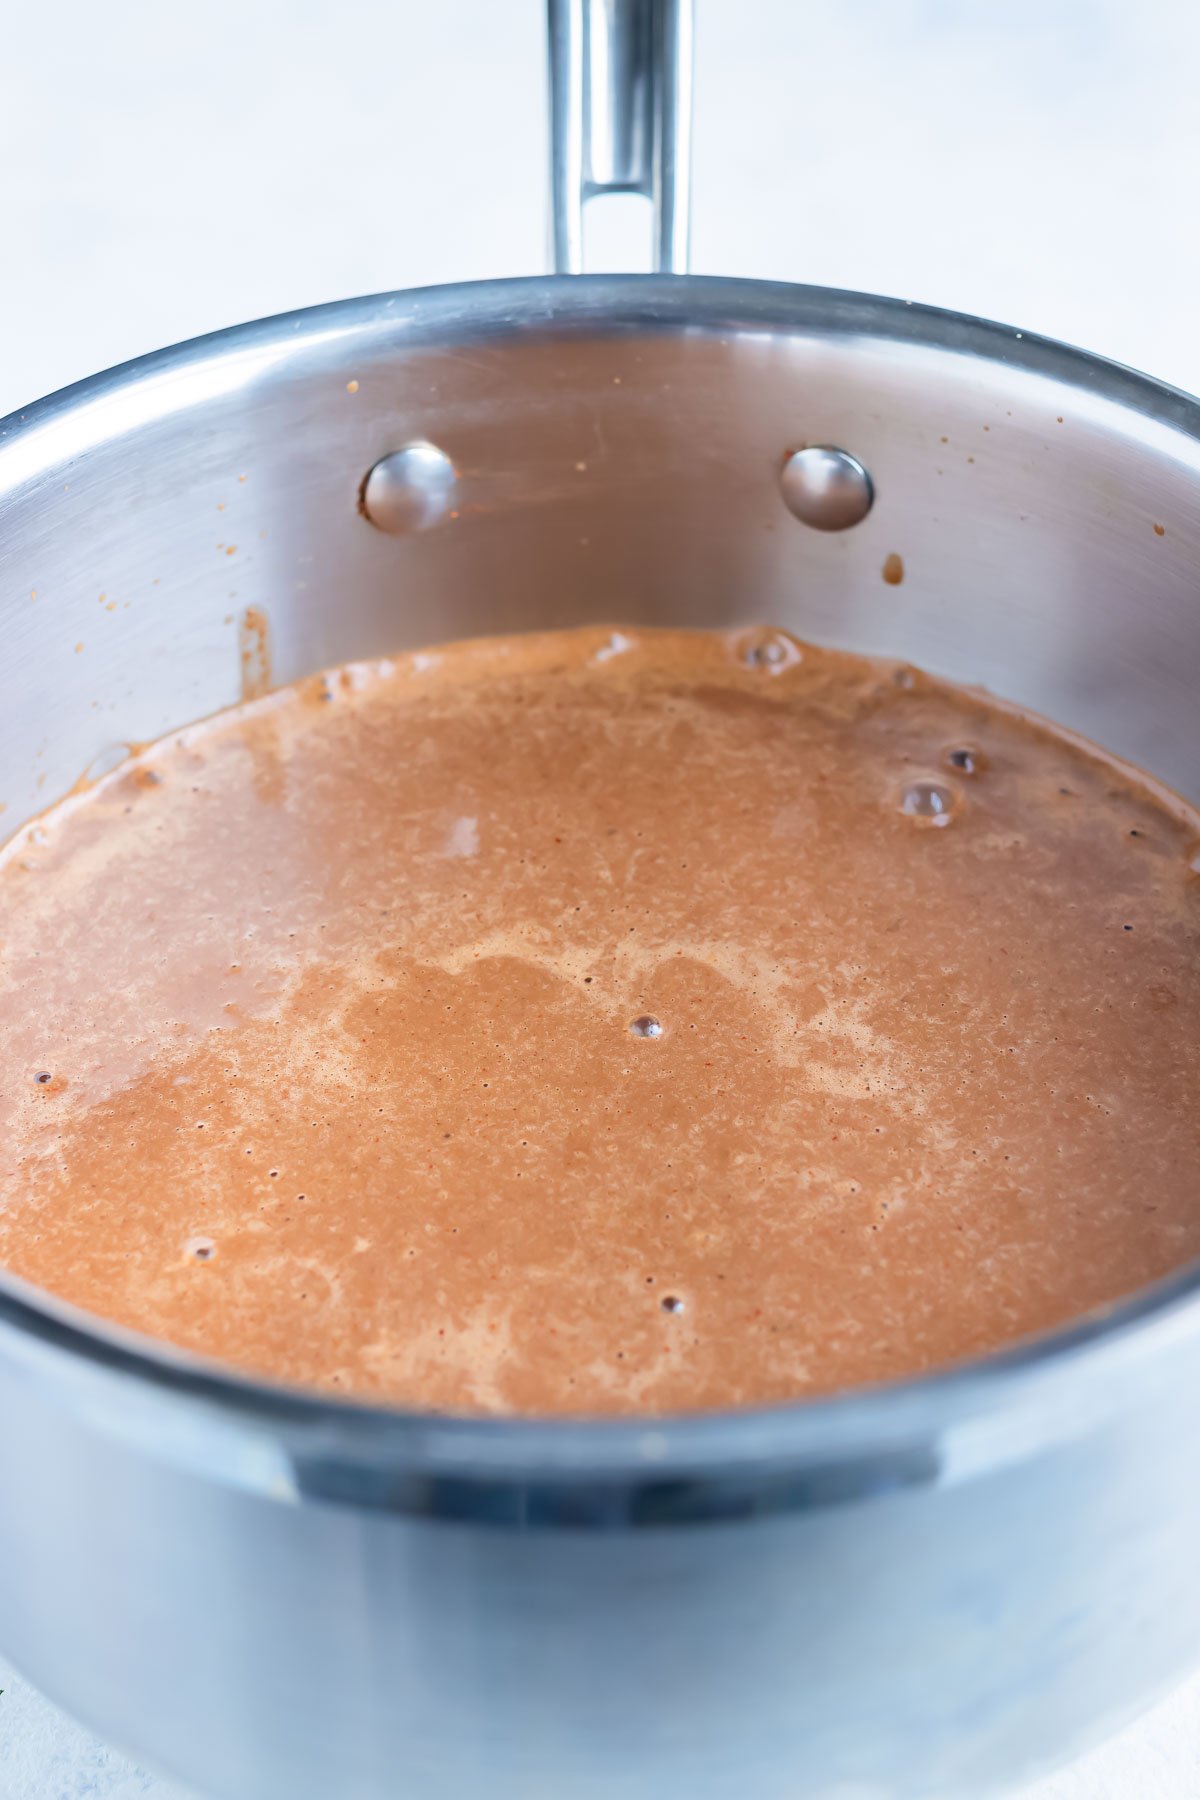 The homemade mole sauce is set to simmer for 15 minutes.